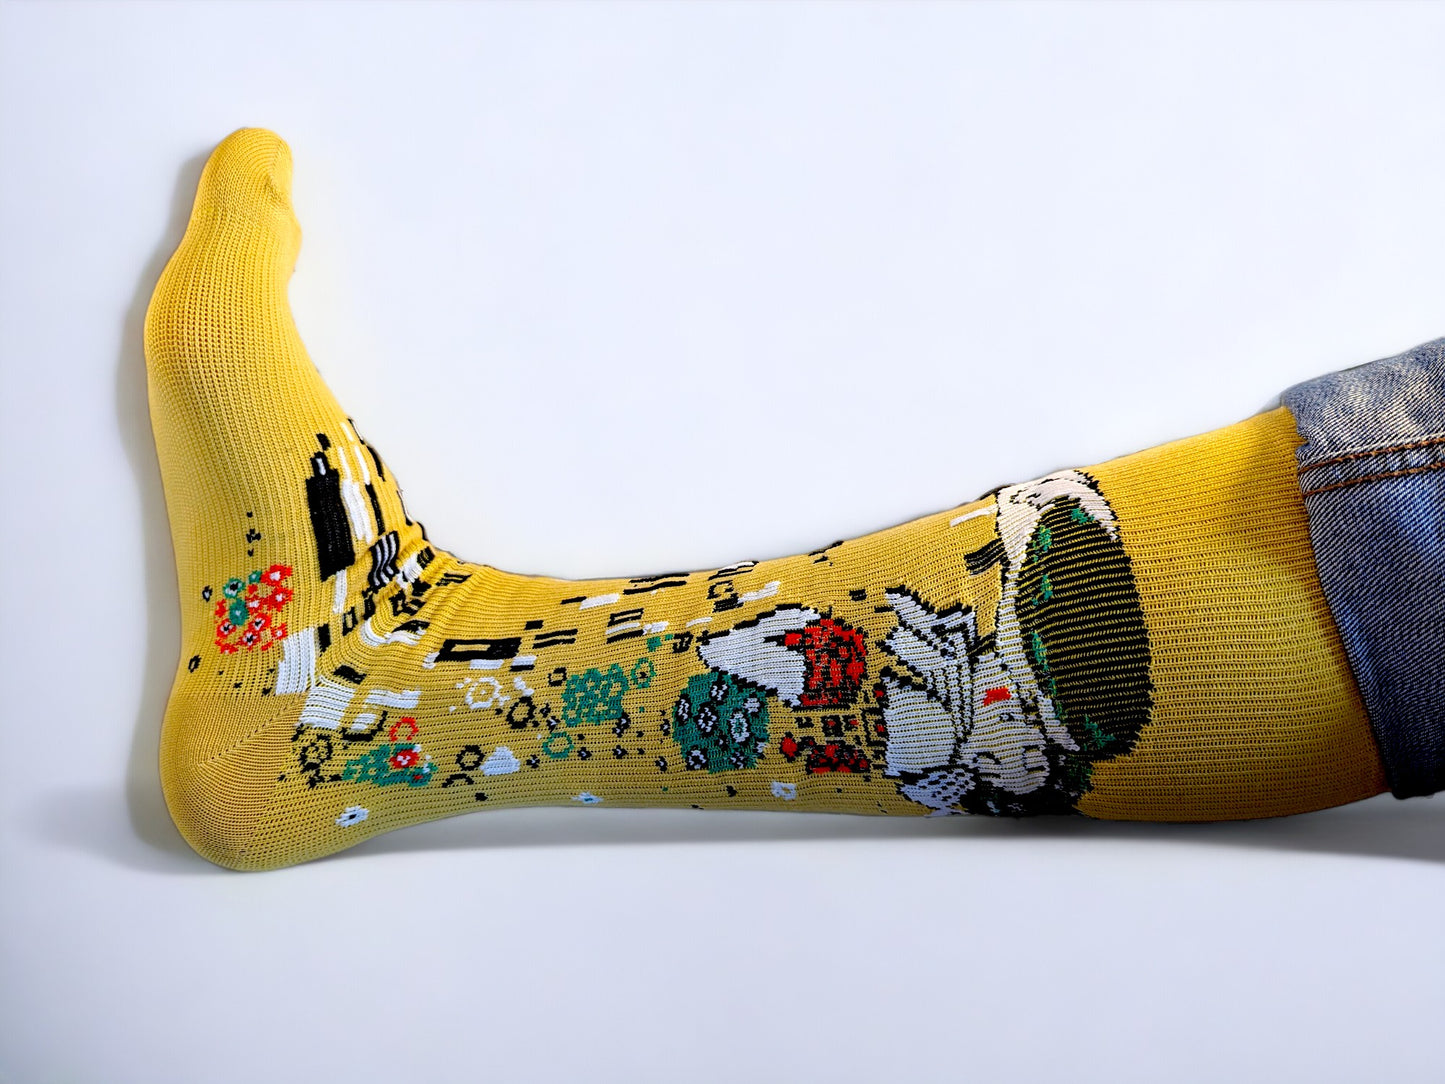 A leg wearing yellow compression socks with the famous painting 'Kiss' printed on it.